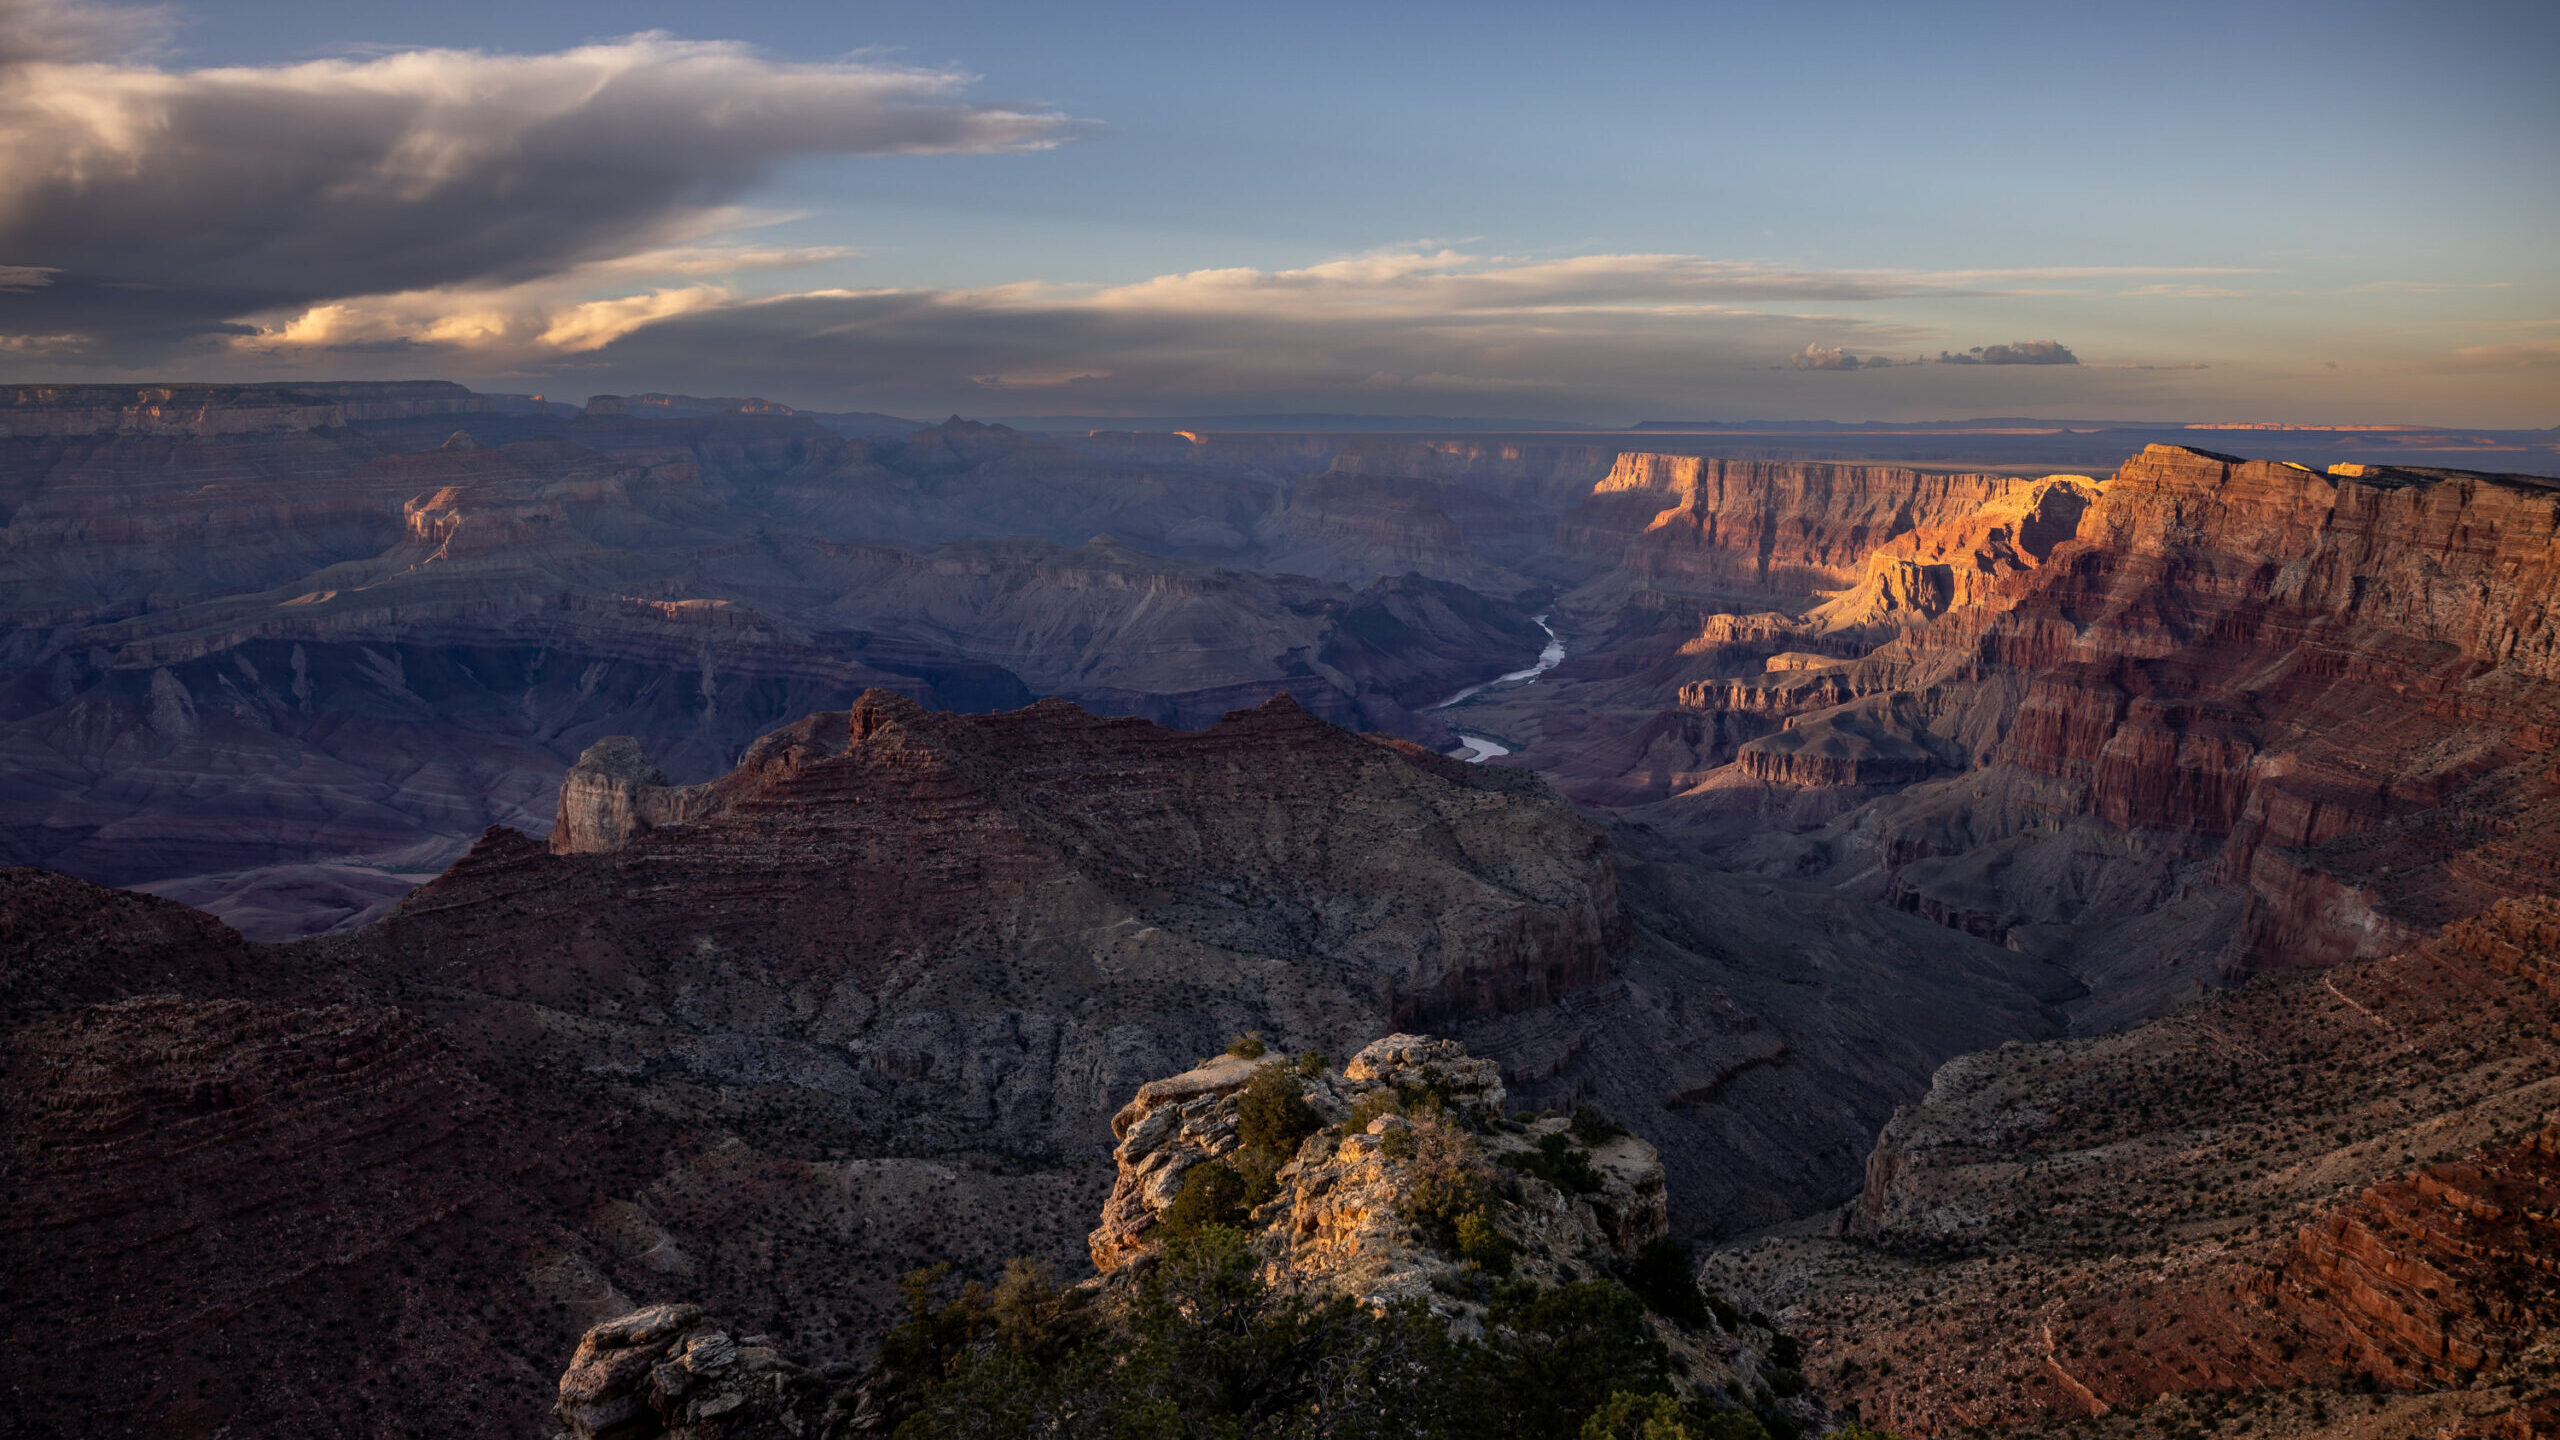 The Colorado River is visible flowing through the Grand Canyon as seen from the south rim of Grand ...